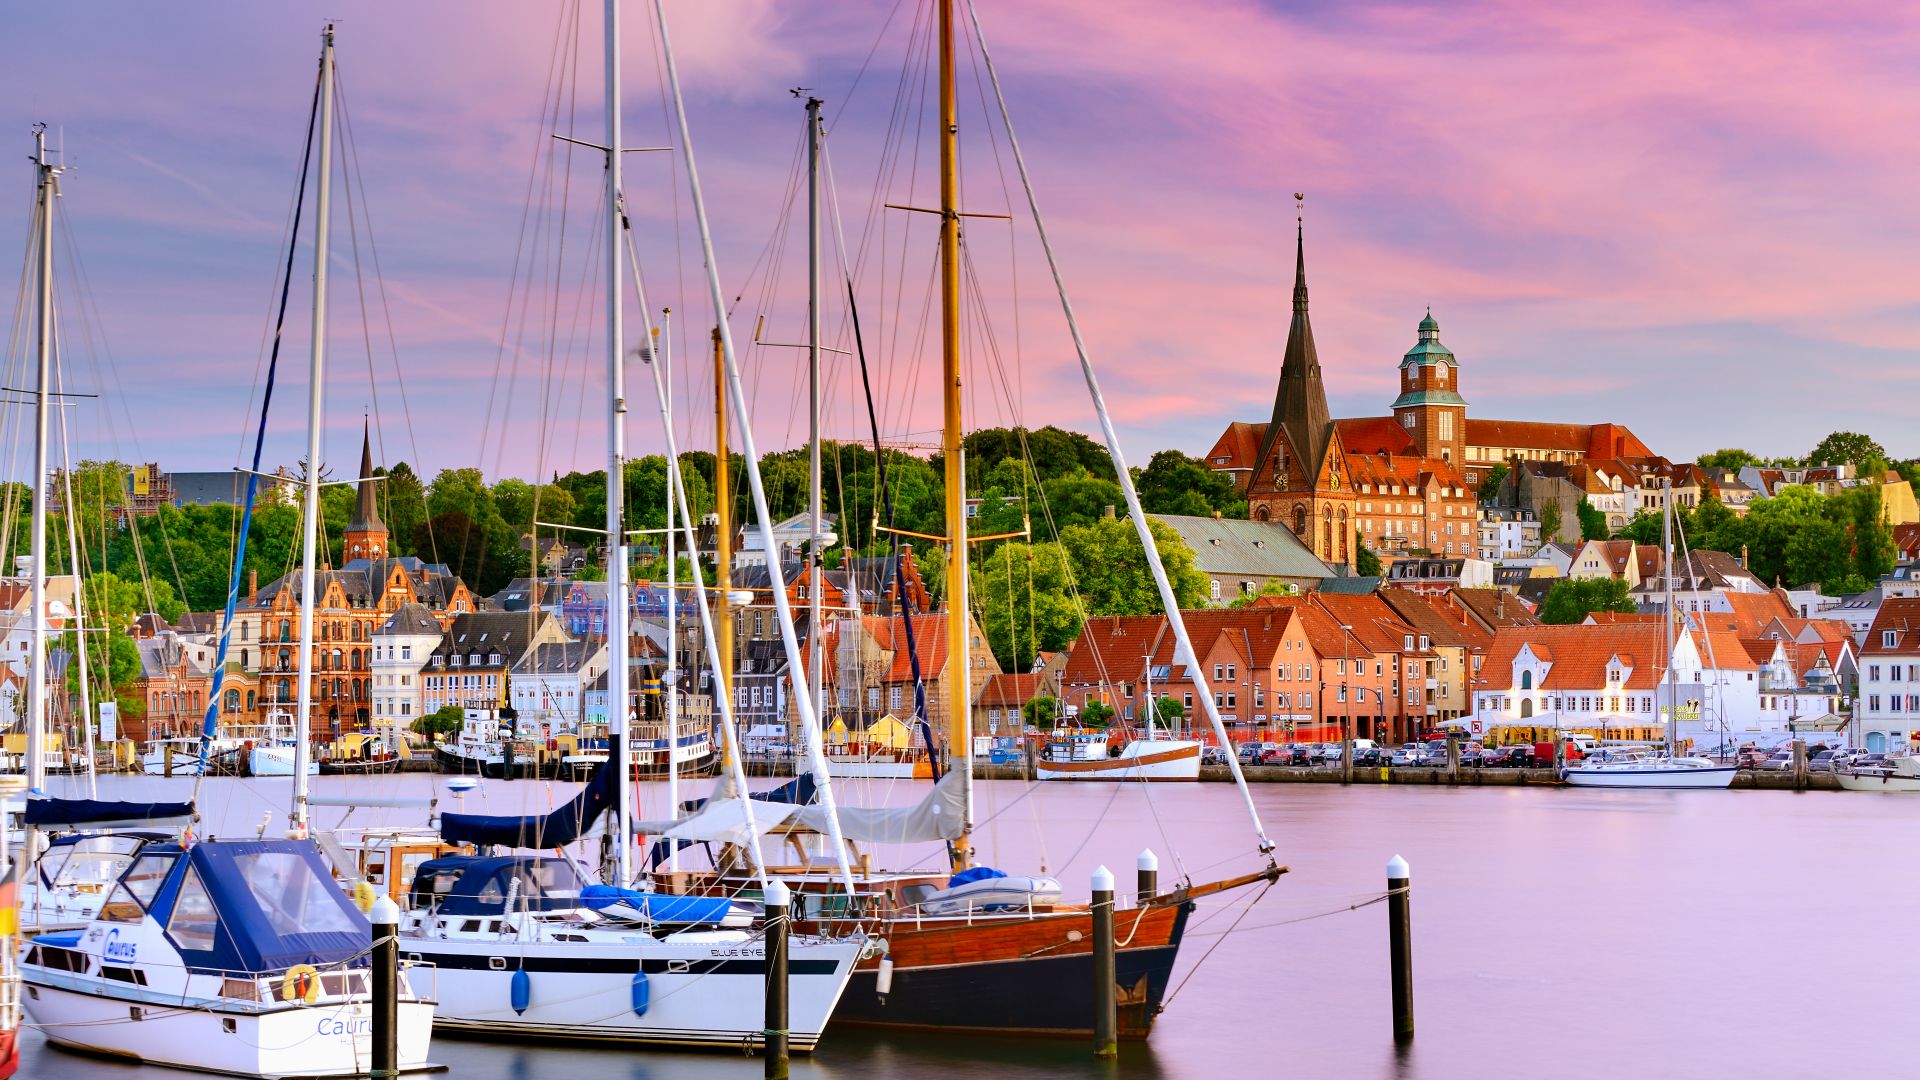 Flensburg: The marina and the old town with St. Mary's church